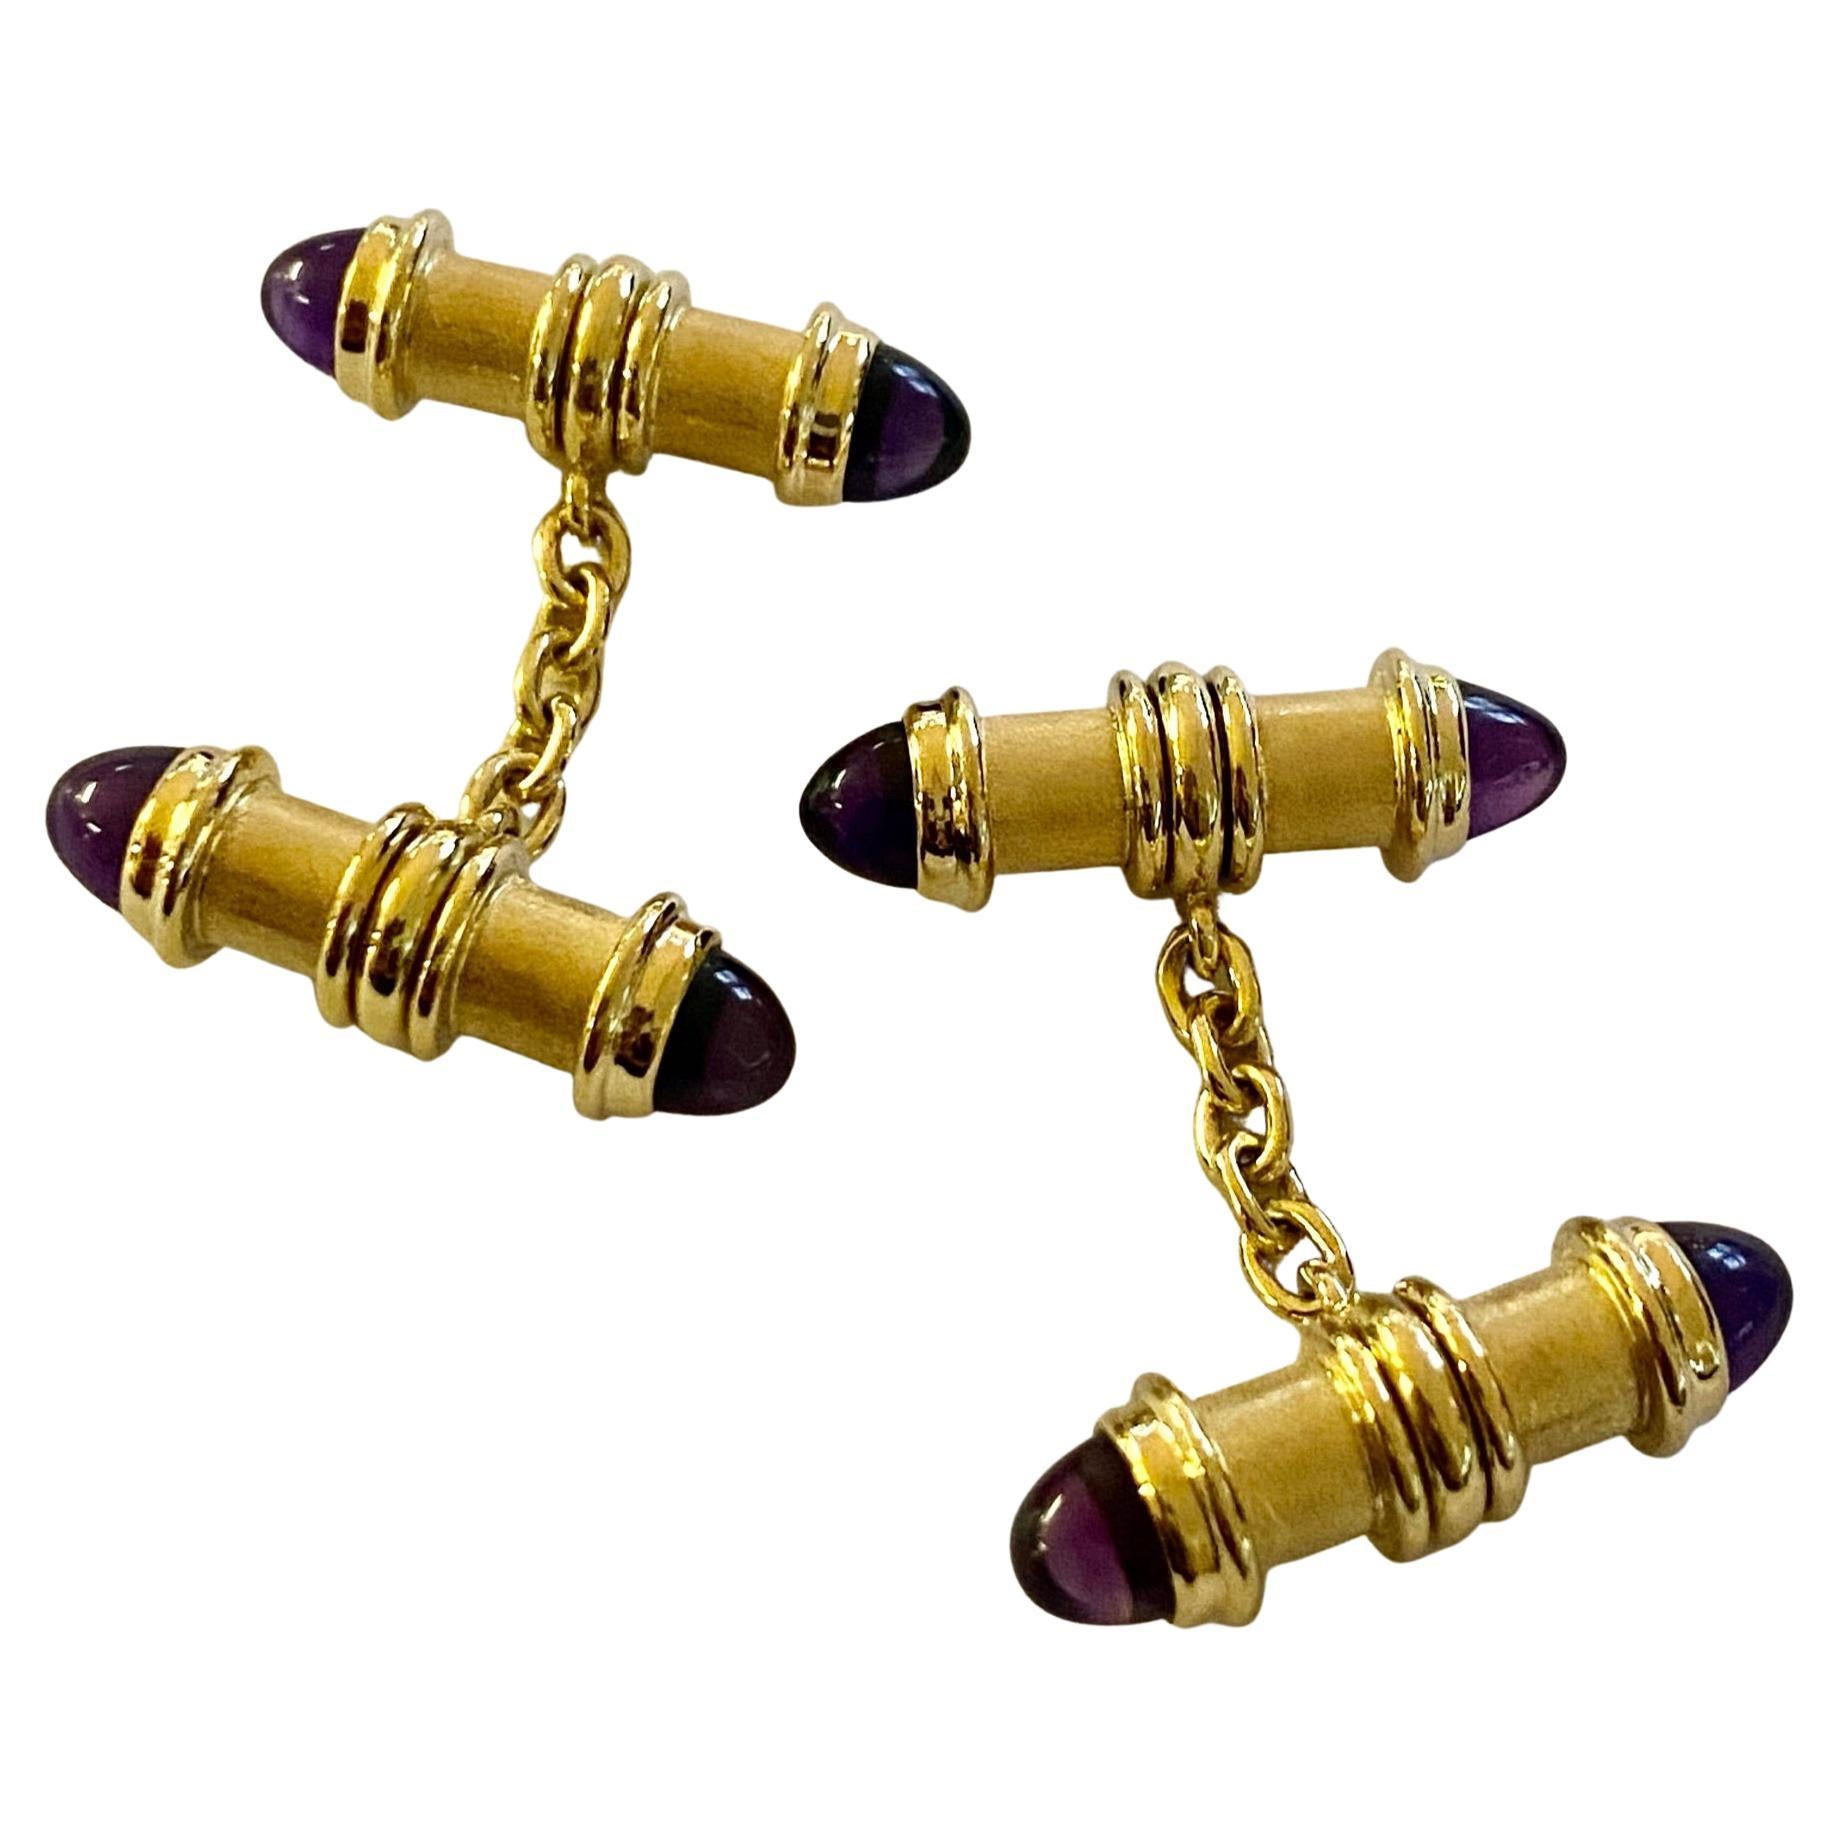 18K, Yellow Gold Cufflinks, Amethyst Stones, Italy ca 1975 For Sale